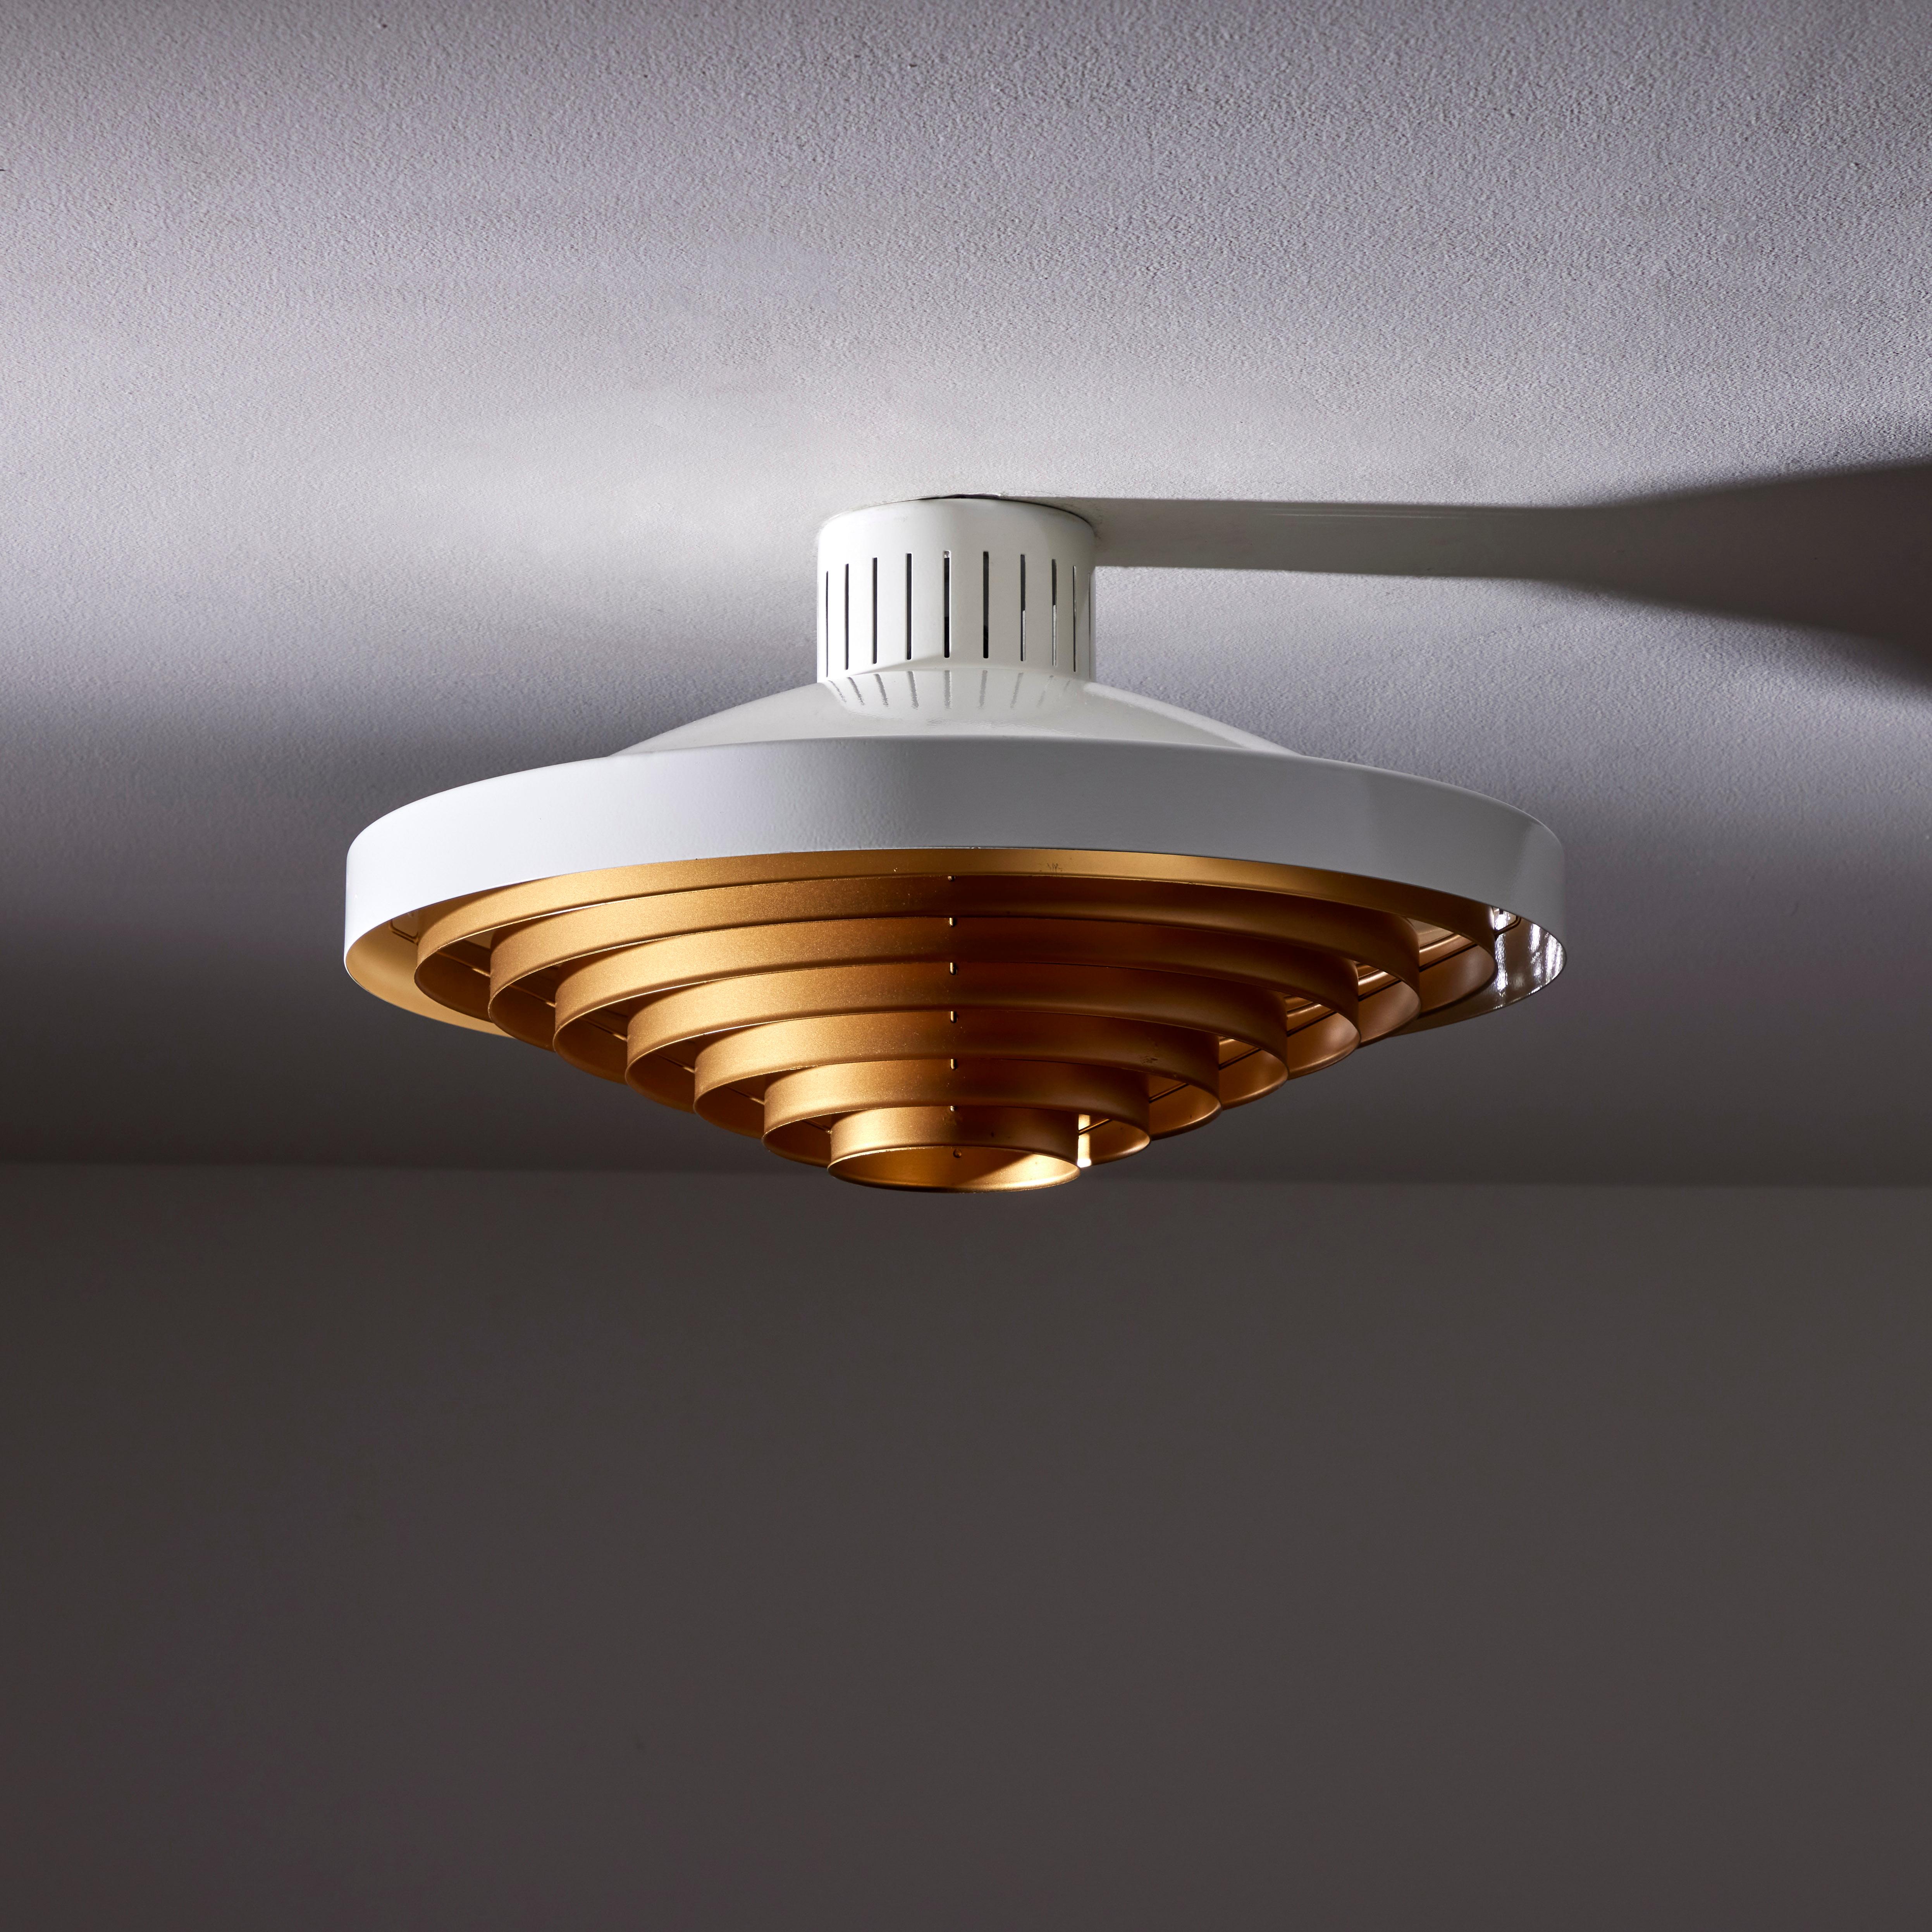 Two Model 5560/Z200 Flush Mount Ceiling Lights by Lisa Johansson-Pape for Orno 3